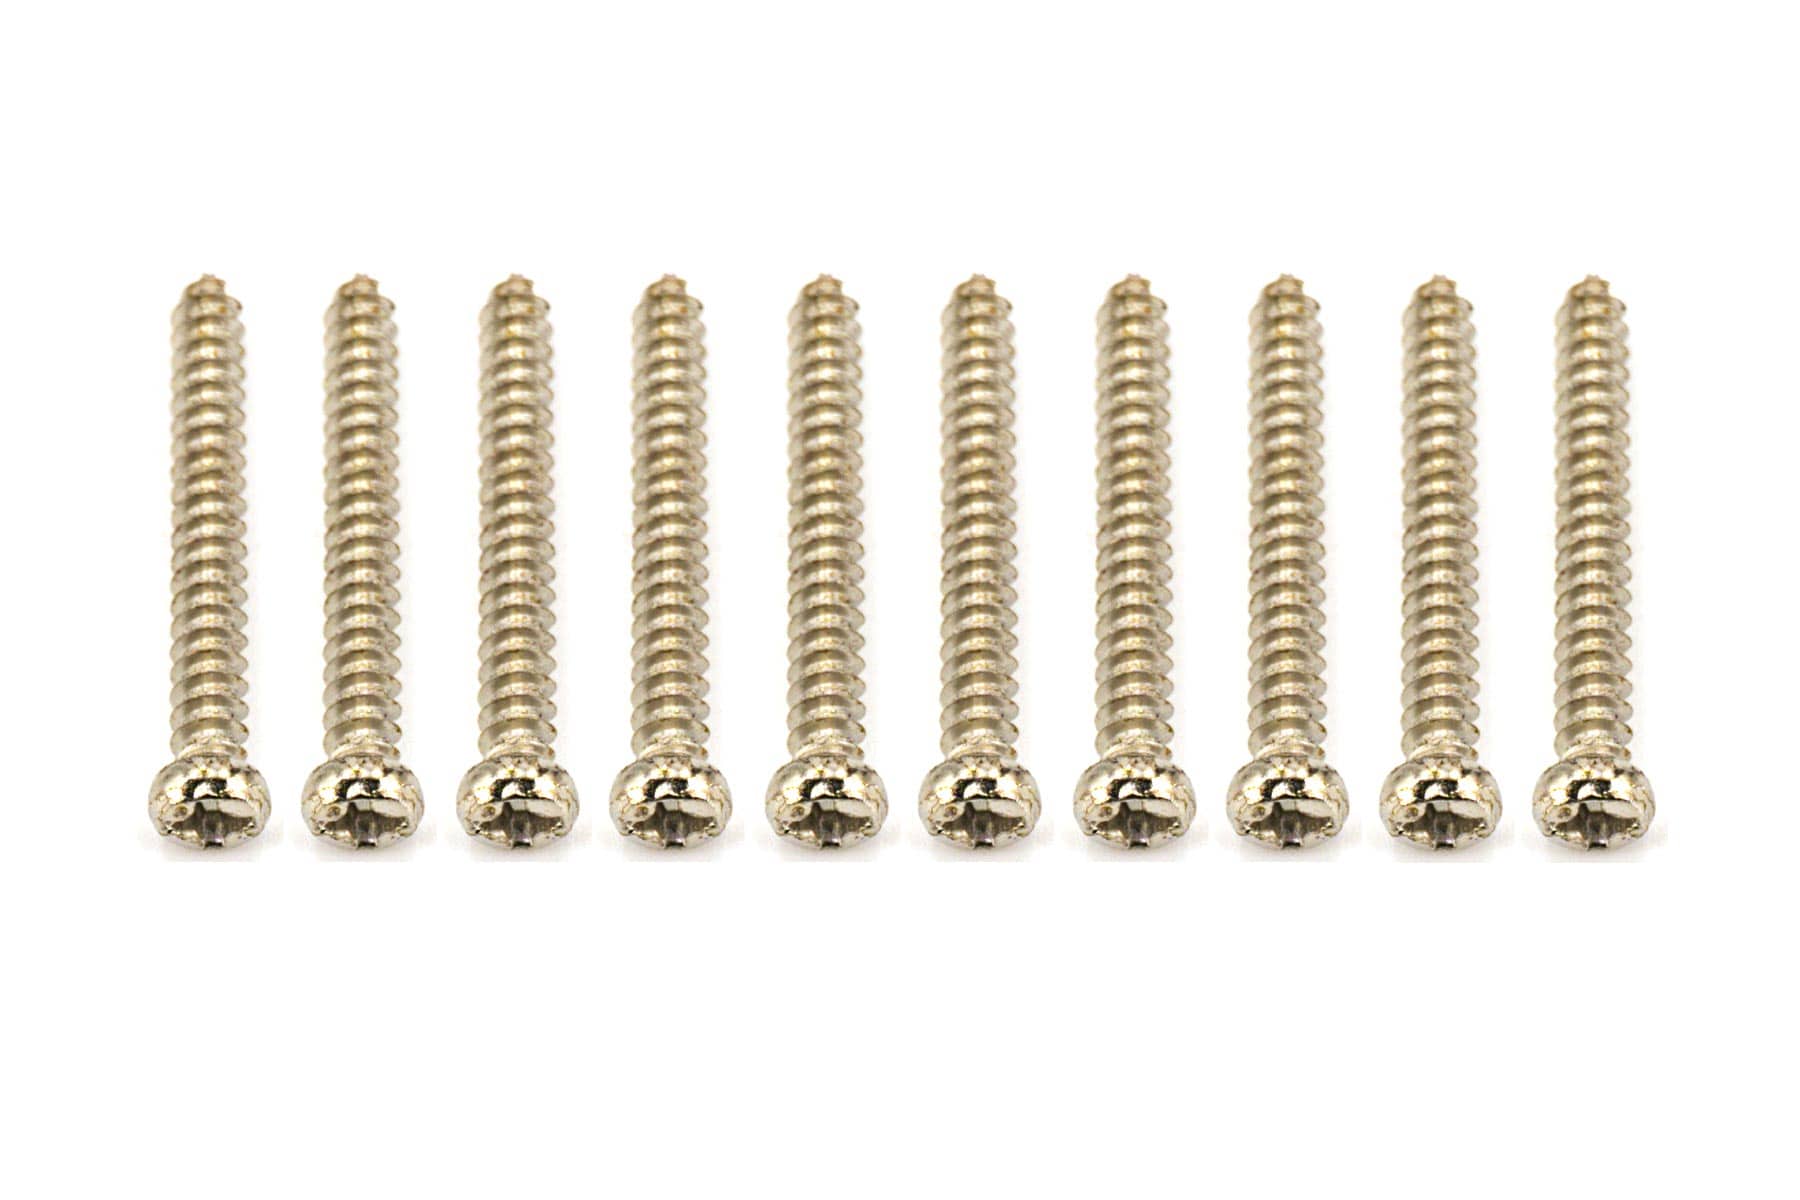 BenchCraft 3mm x 25mm Self-Tapping Screws (10 Pack)